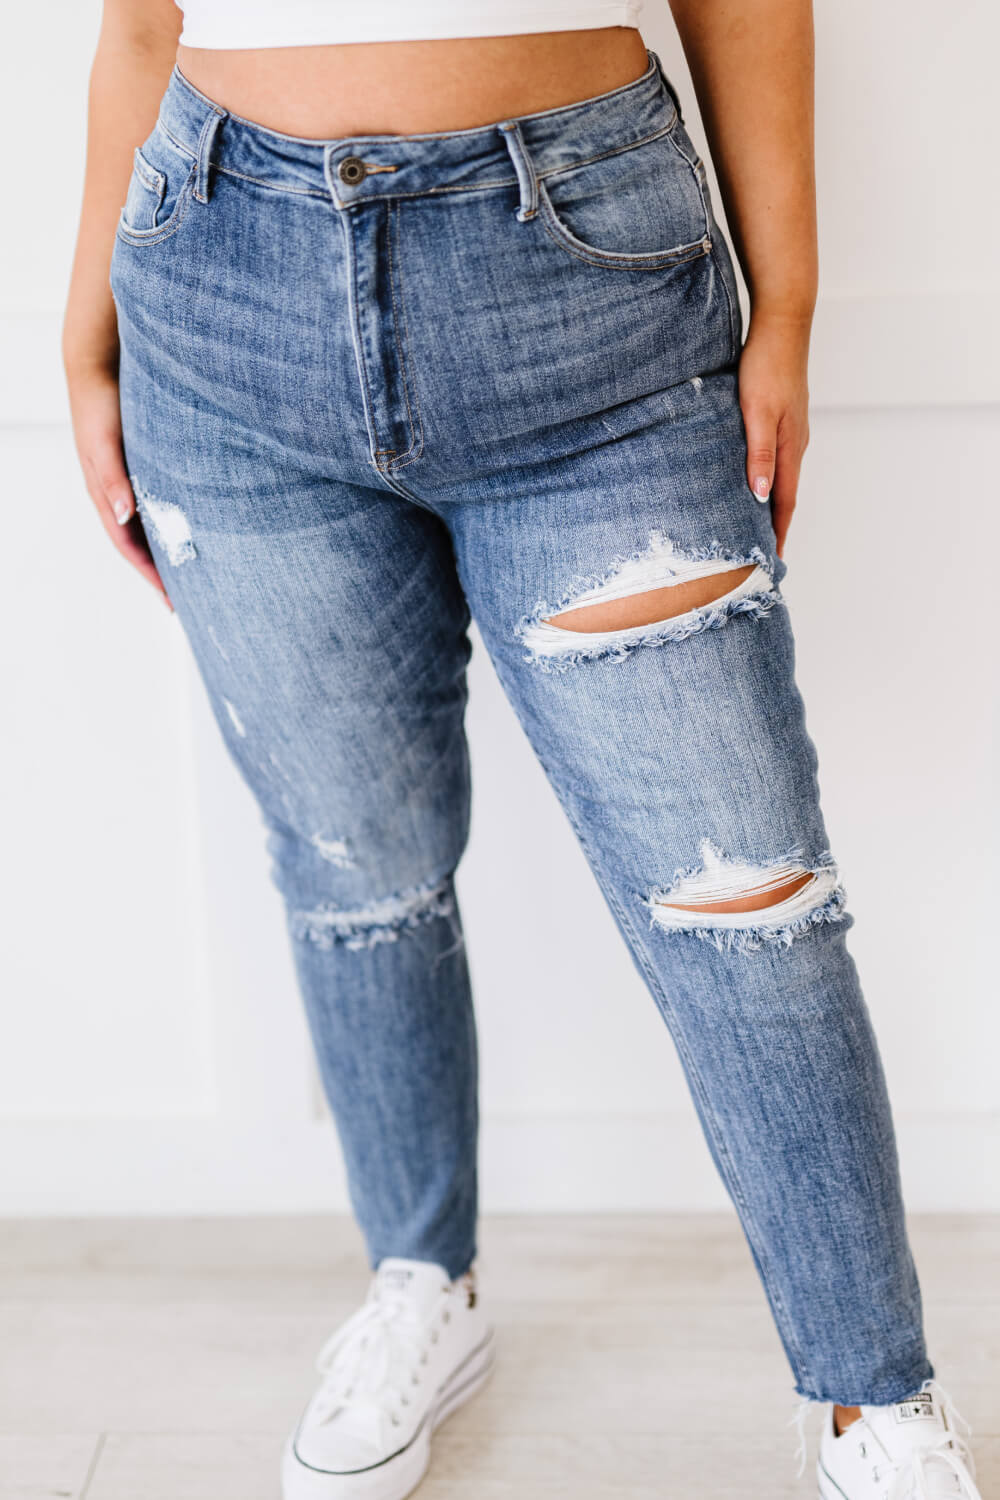 "Melissa Denim" are distressed skinny jeans that are the perfect addition to your wardrobe. They are comfortable and stylish, and can be dressed up or down. The distressed look is perfect for a casual day out, and the skinny fit will show off your curves. These are a medium wash. Sizes 3-11